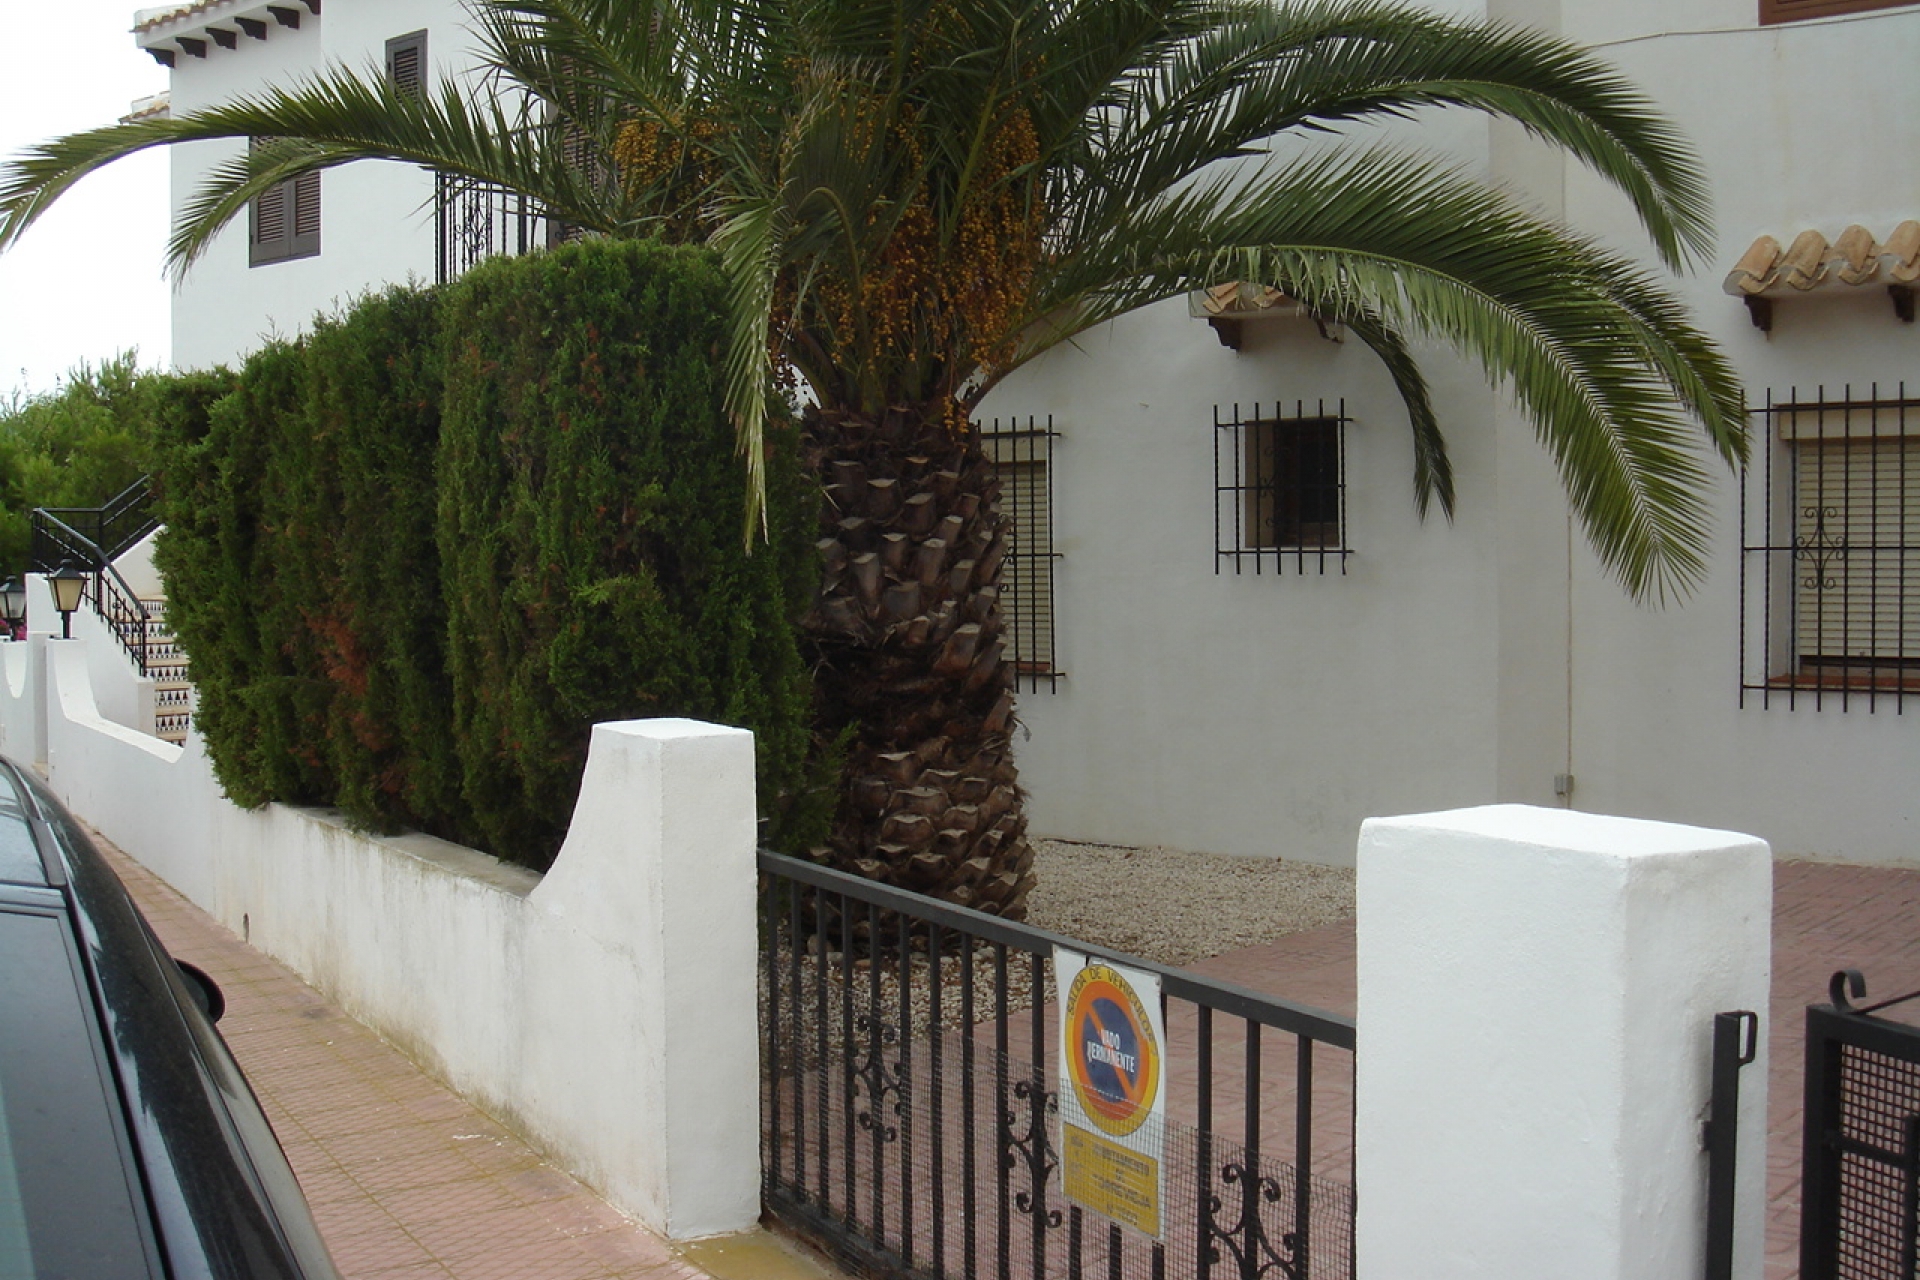 Property Sold - Bungalow for sale - Torrevieja - Aguas Nuevas